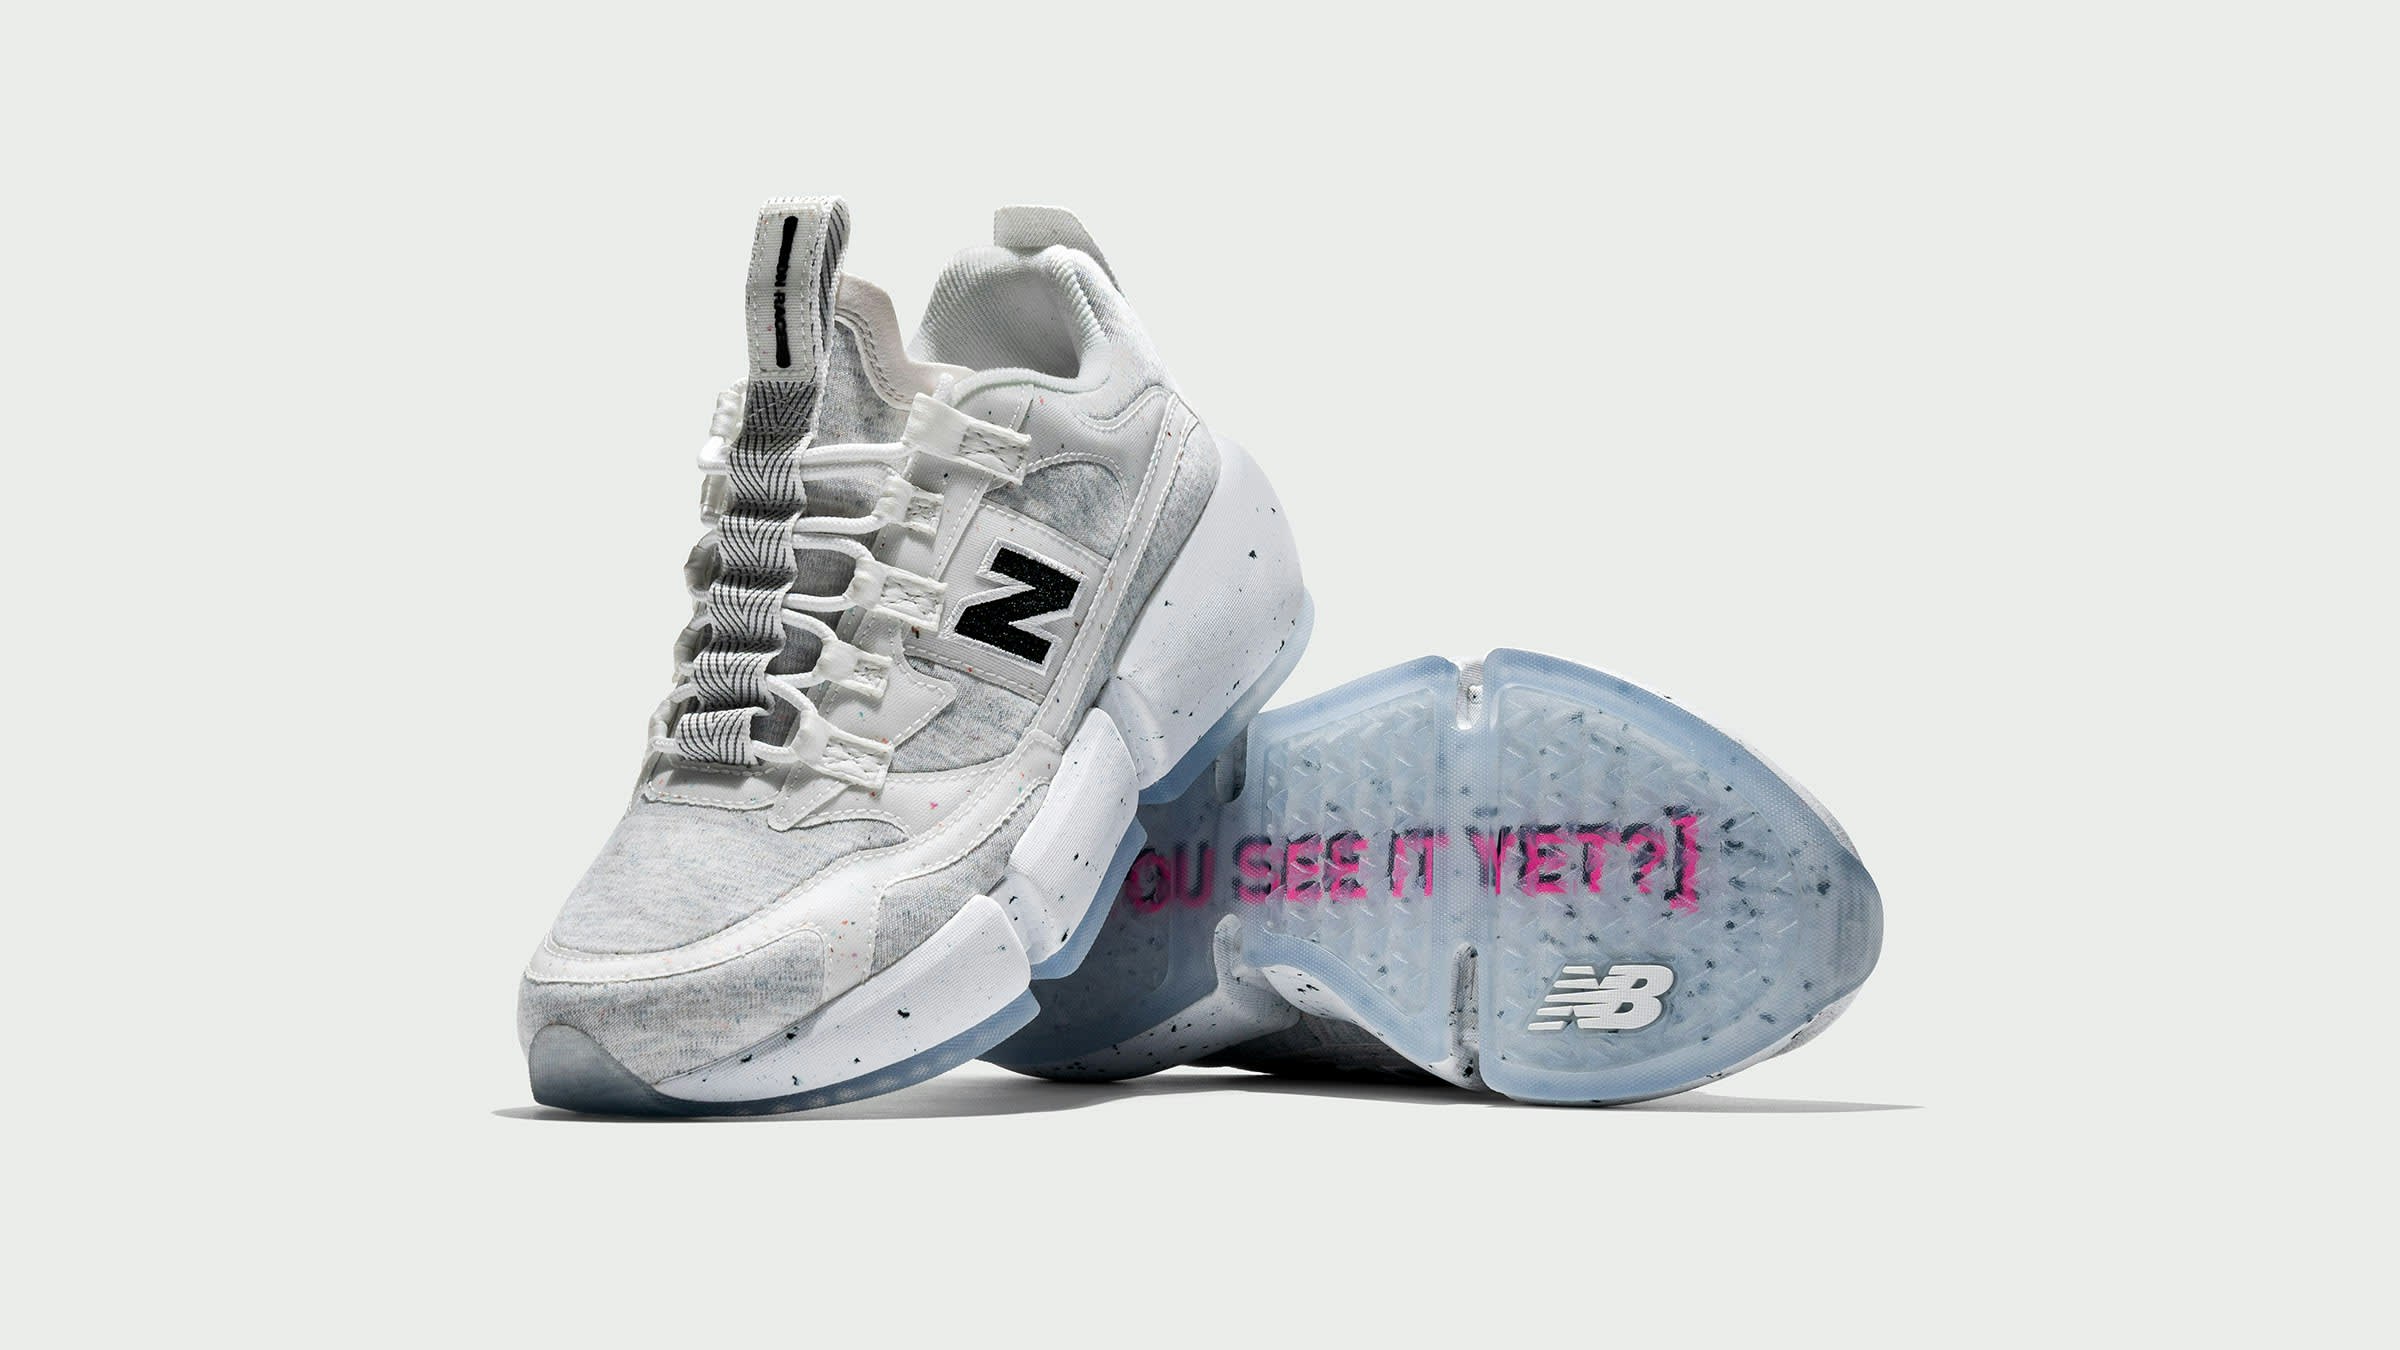 Jaden Smith x New Balance Vision Racer "Recycled"